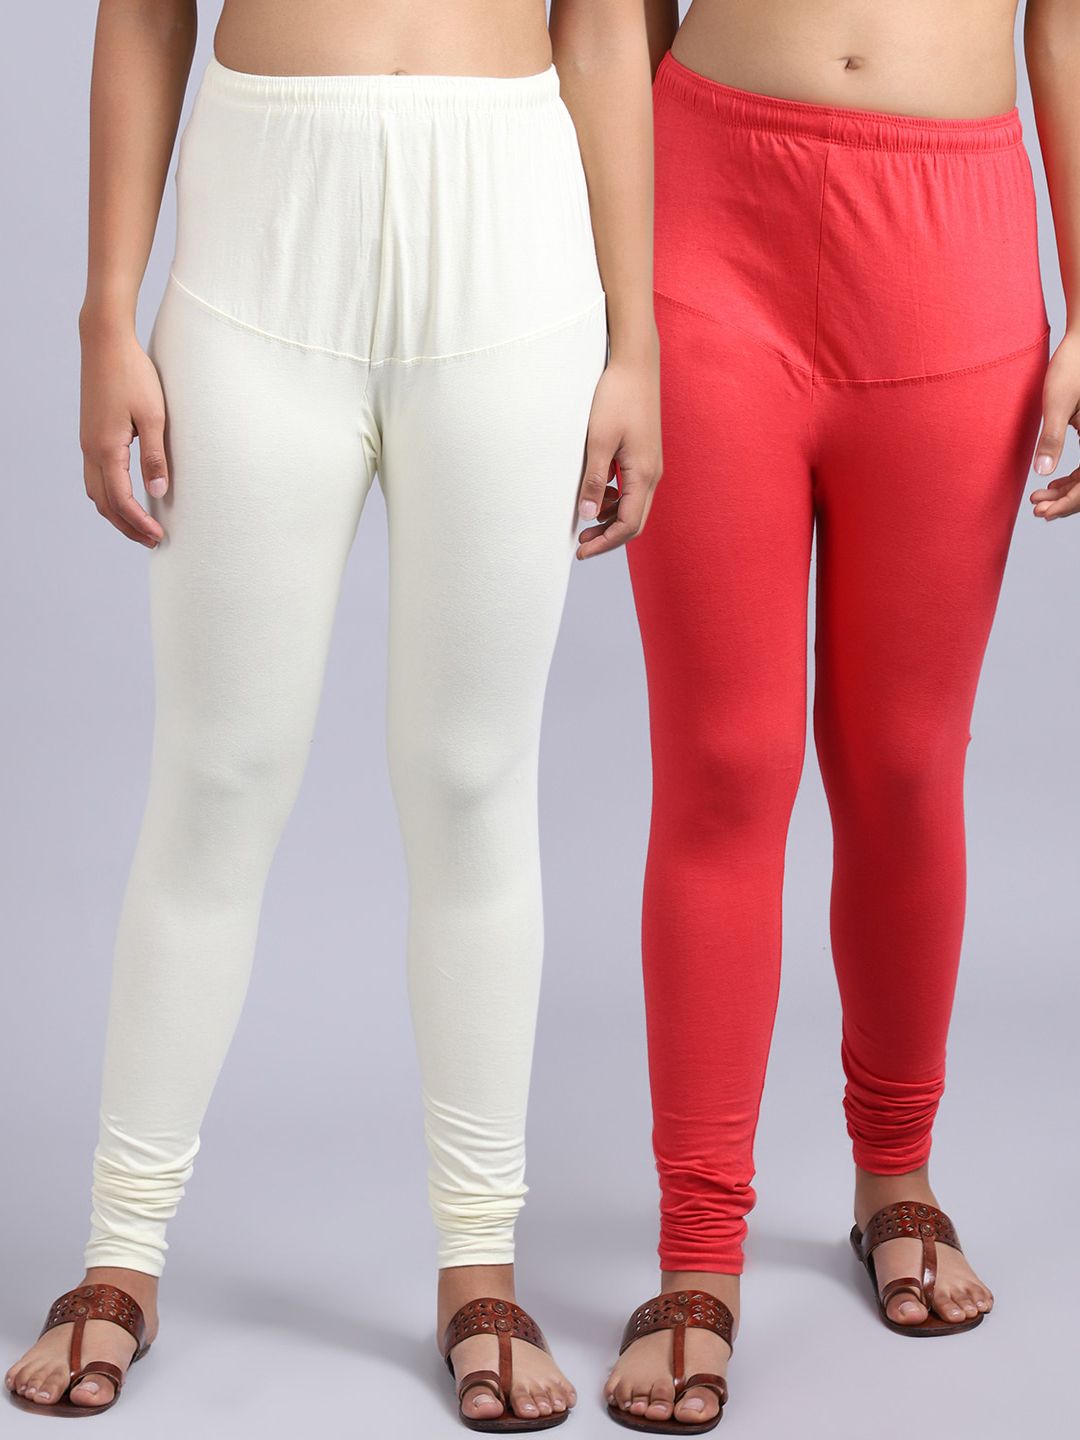 GRACIT Women Pack of 2 Peach & White Solid Ankle Length Leggings Price in India